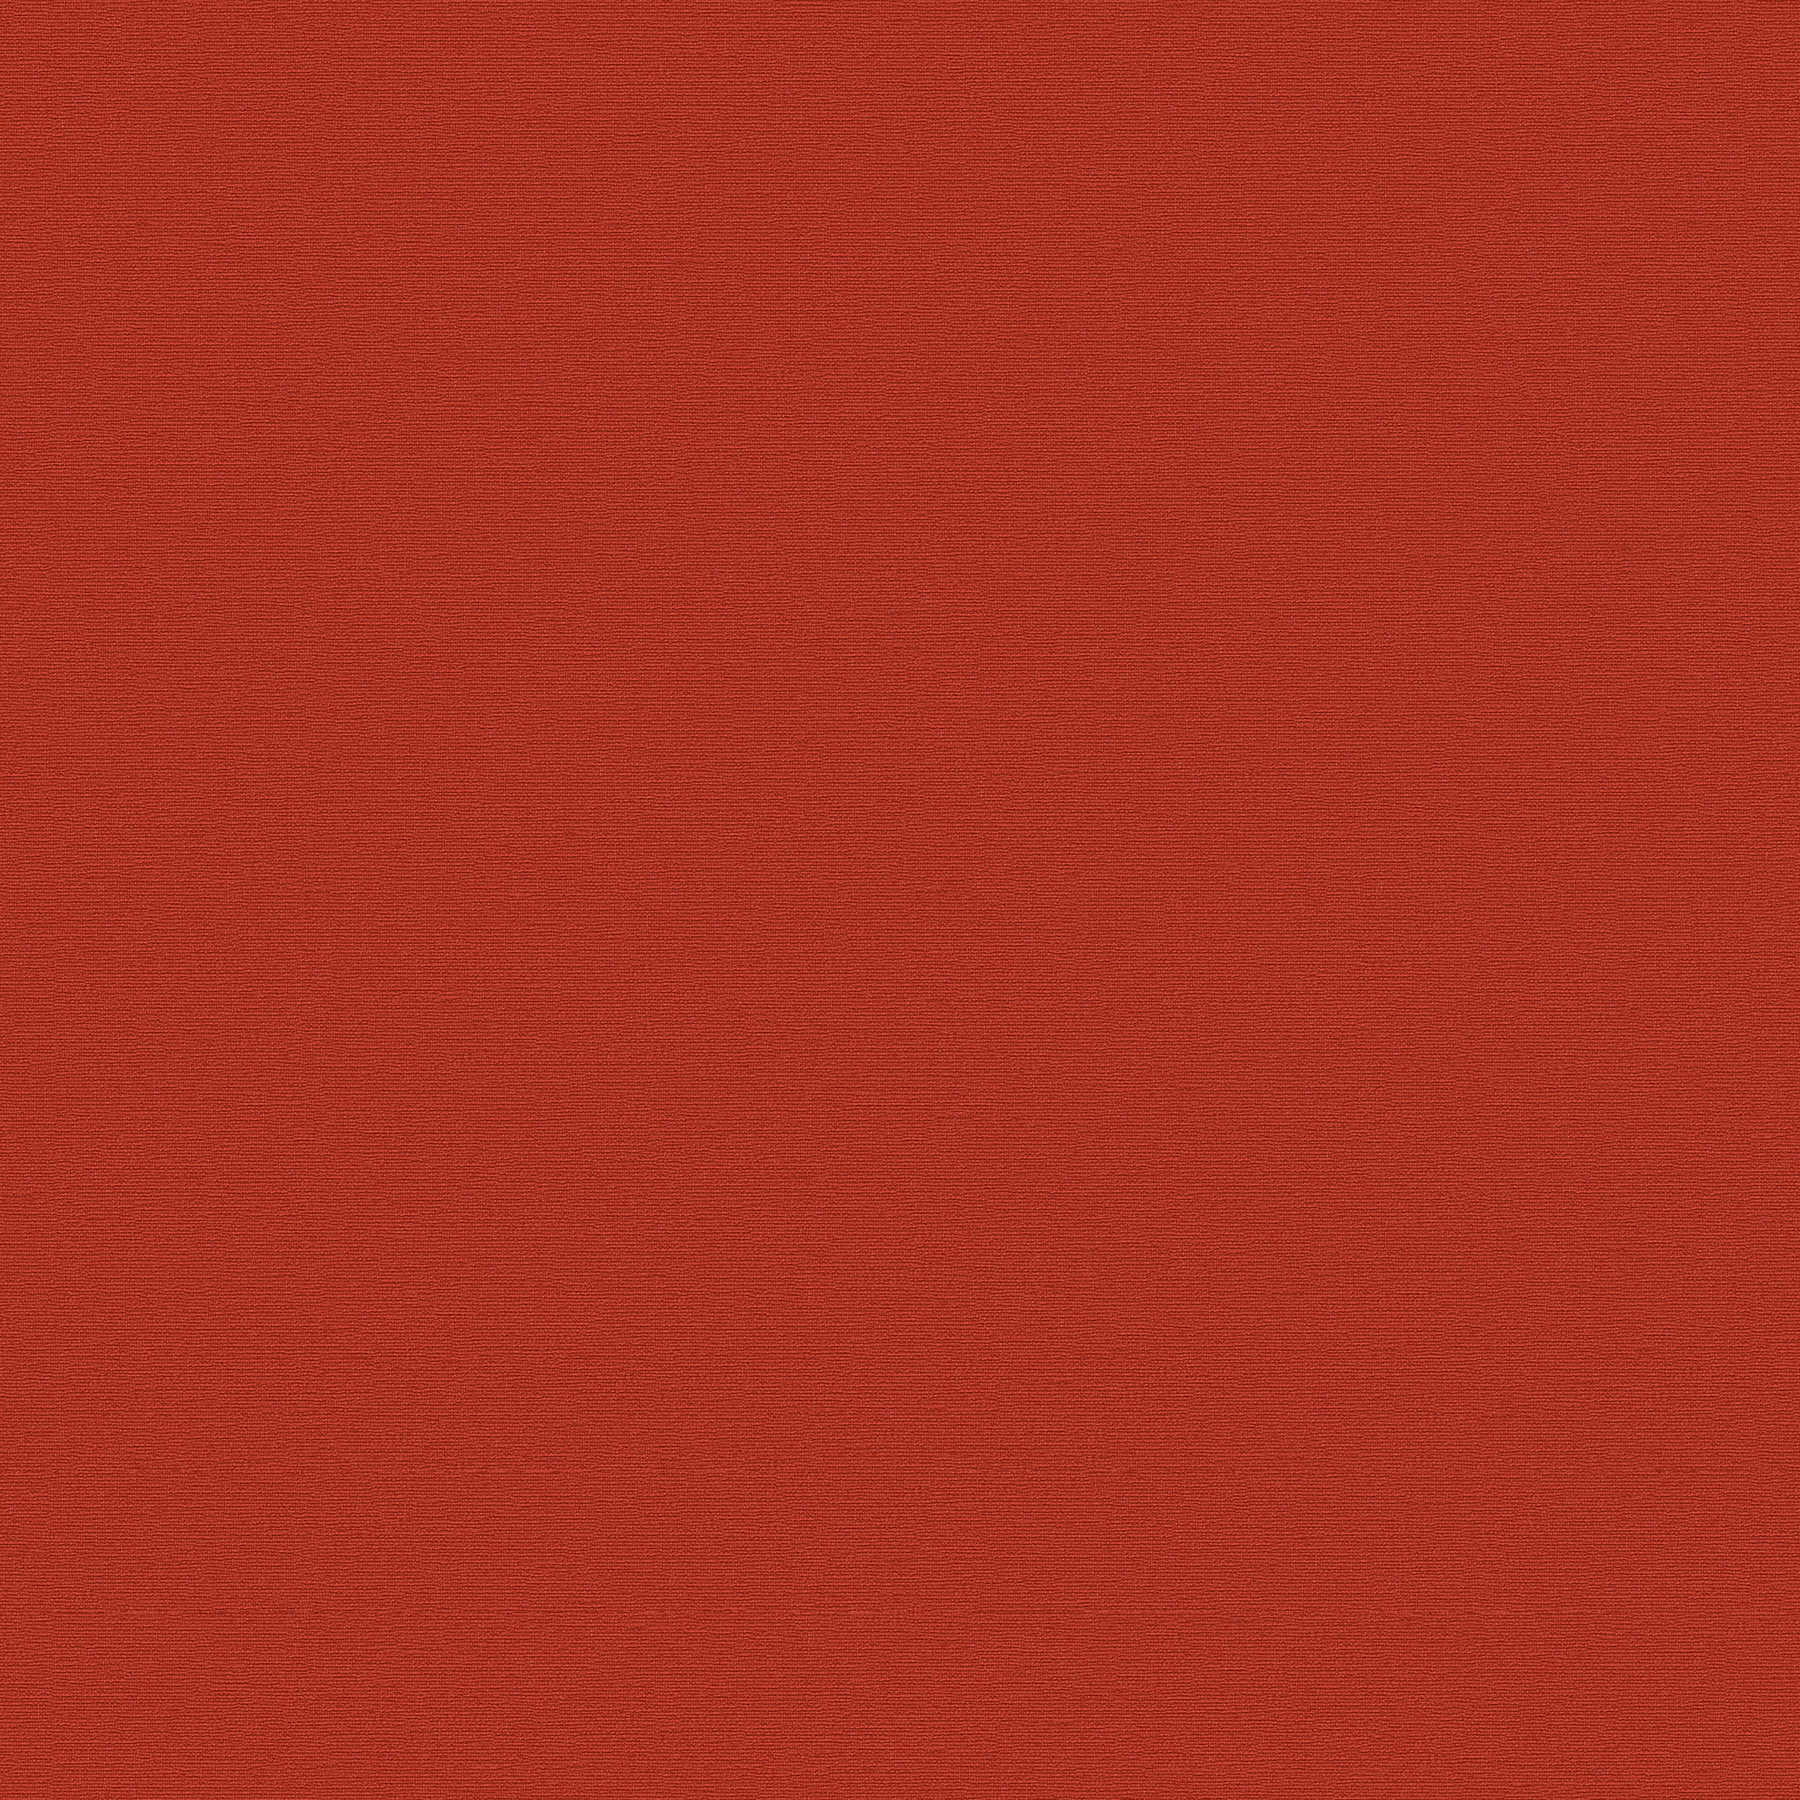 Plain plain wallpaper with light structure - red
